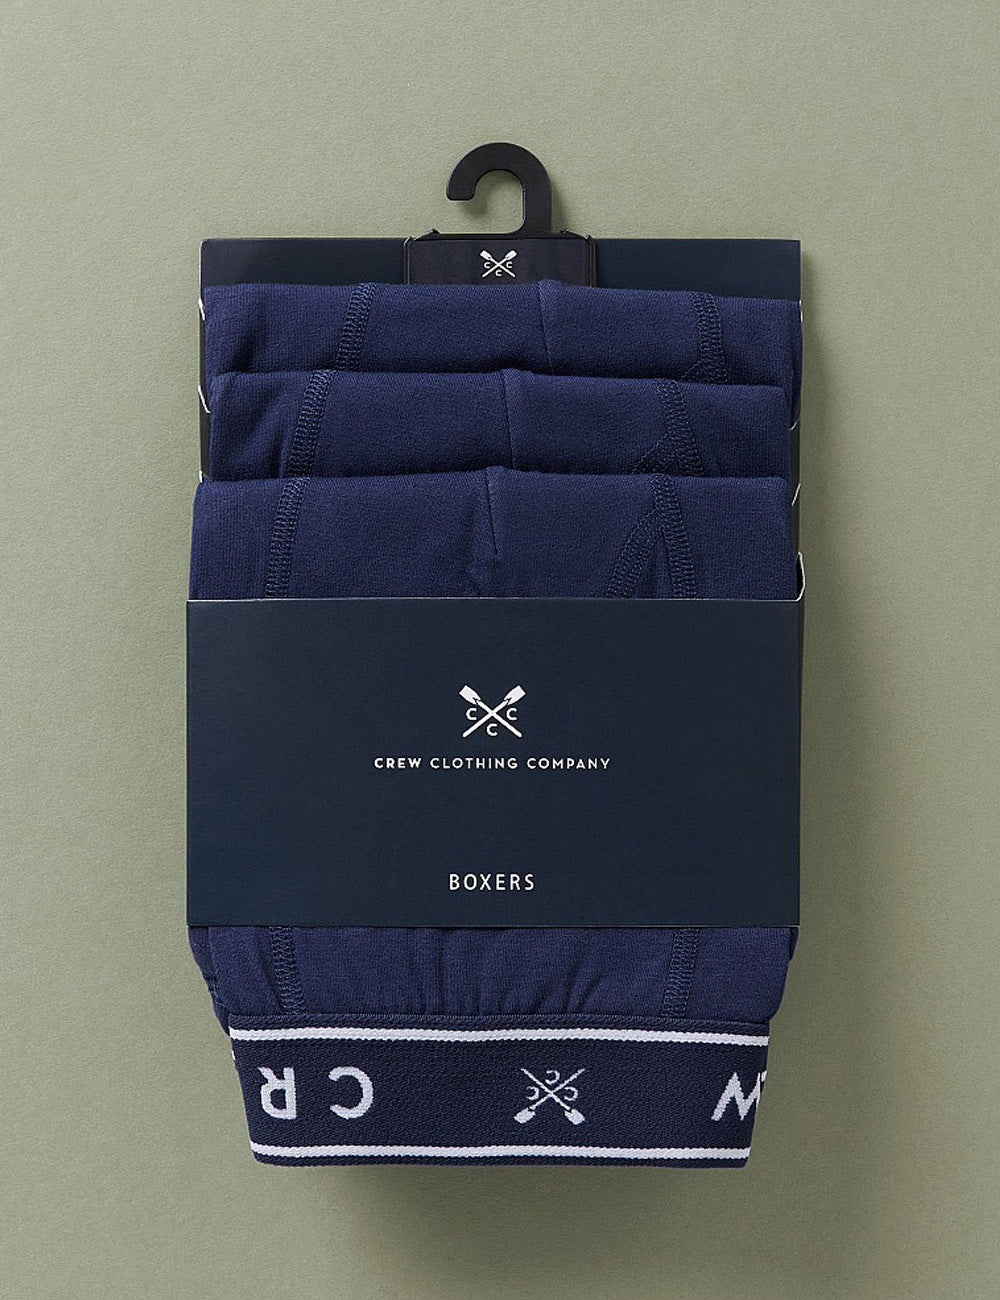 Crew Clothing's Jersey Boxers in Navy in packaging on a green background